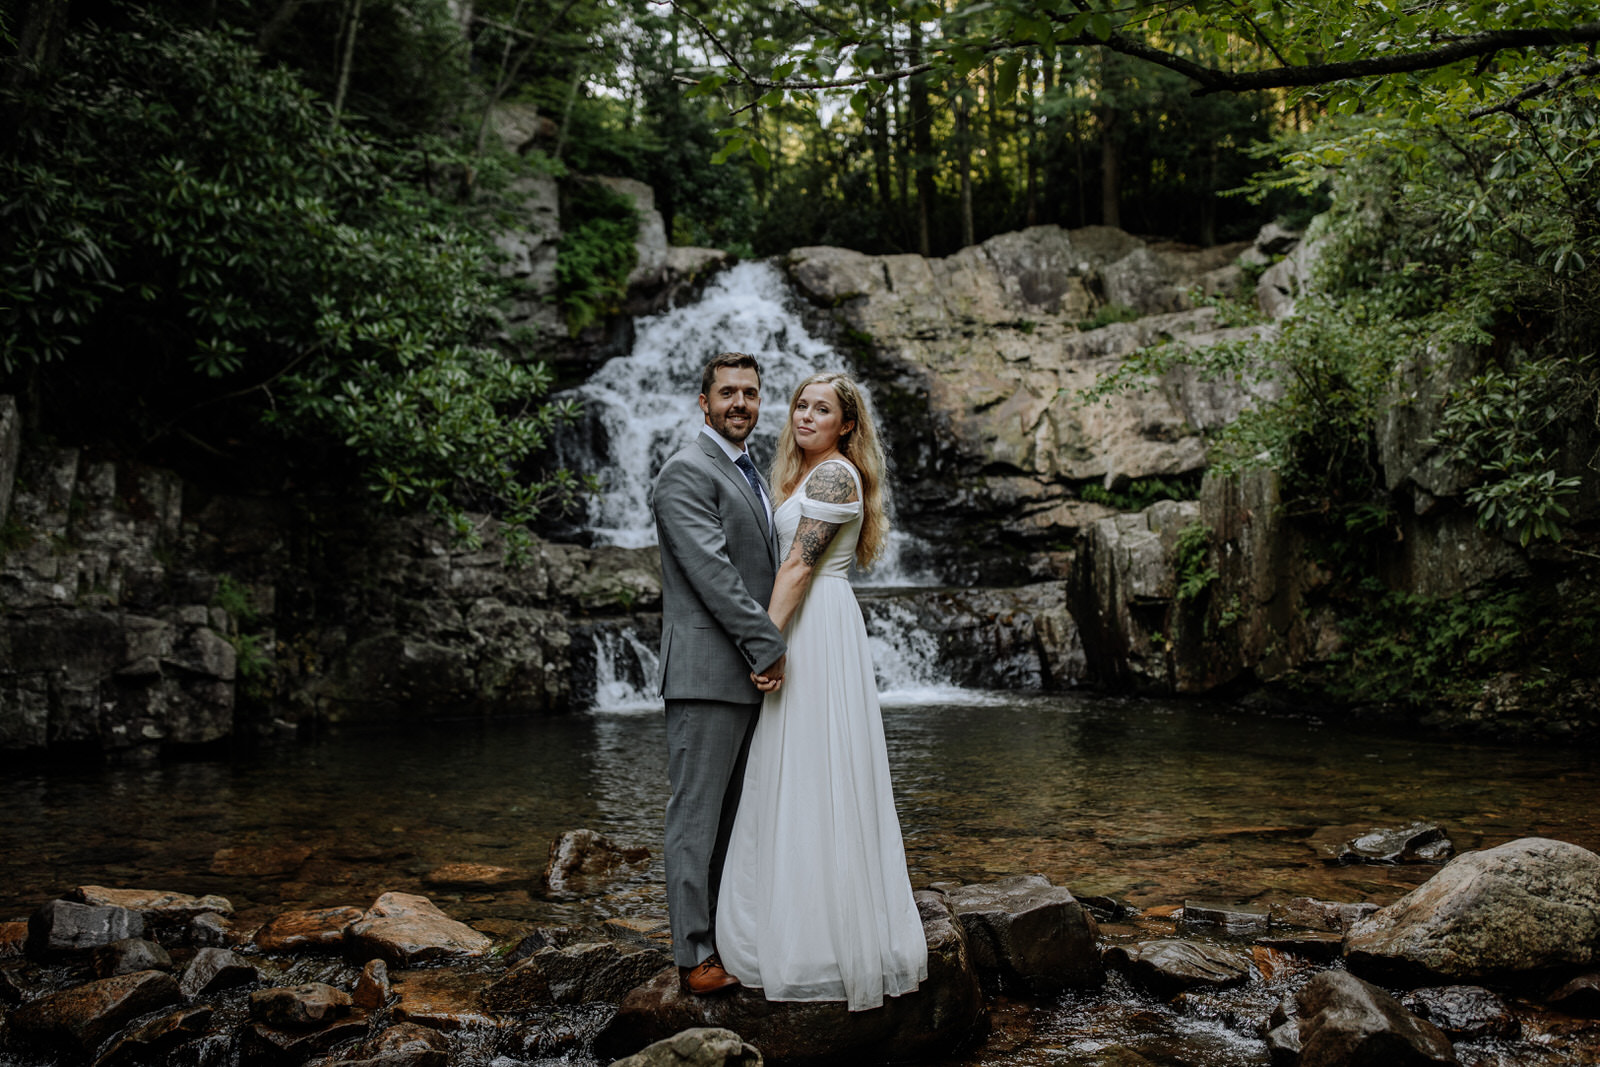 Man and woman posing (looking at camera) in wedding attire kissing in front of Hawk Falls in Hickory Run State Park